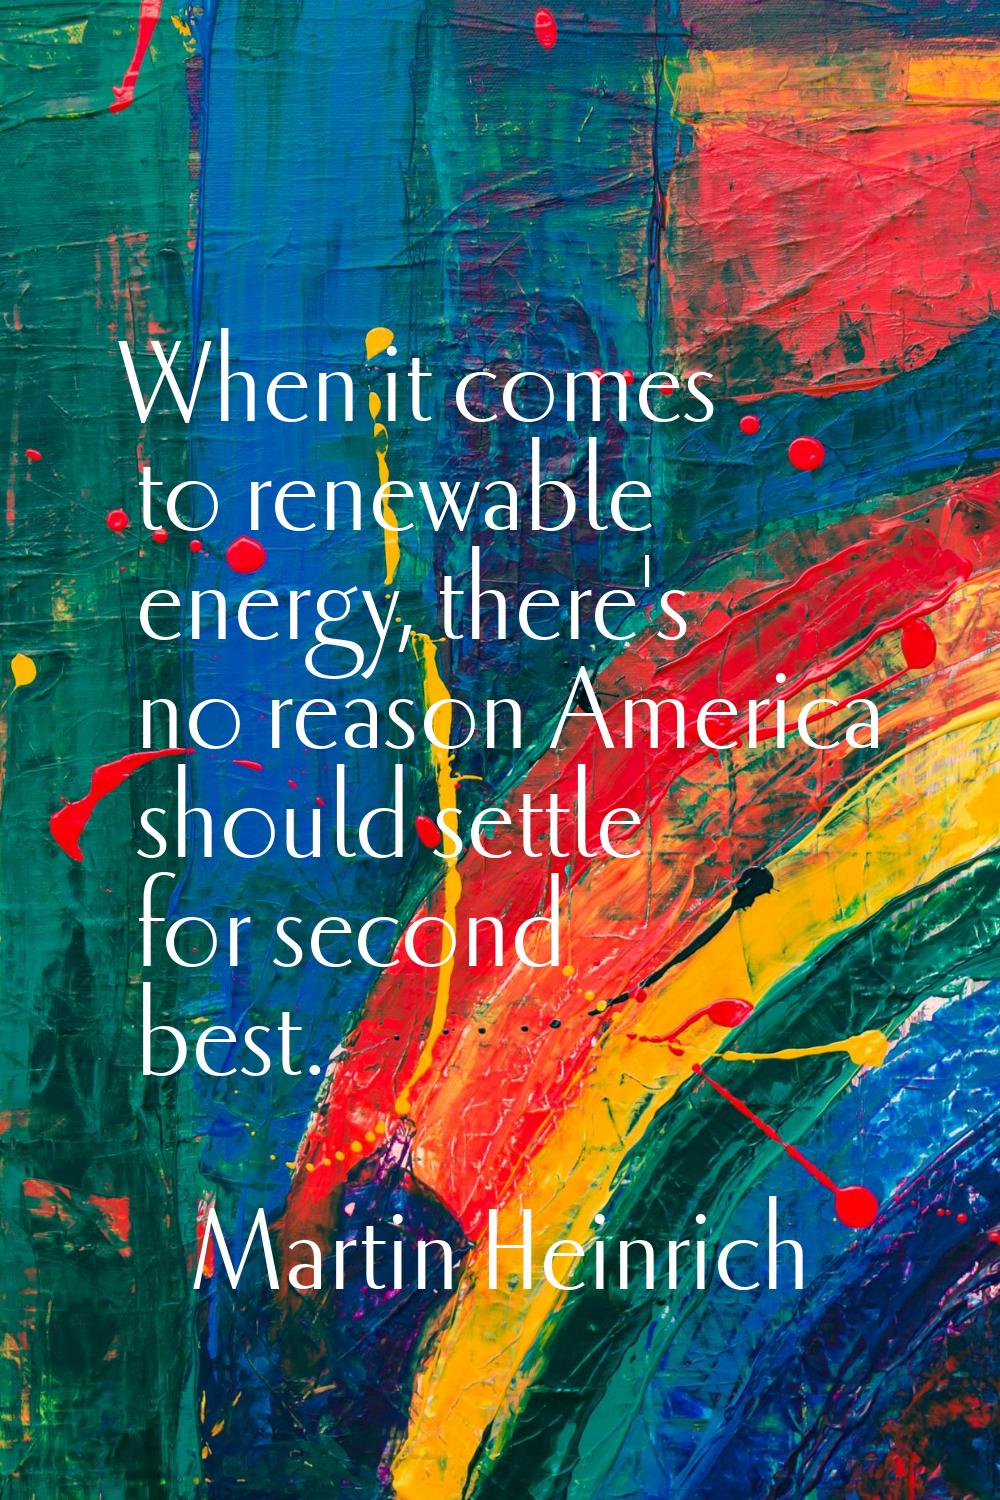 When it comes to renewable energy, there's no reason America should settle for second best.